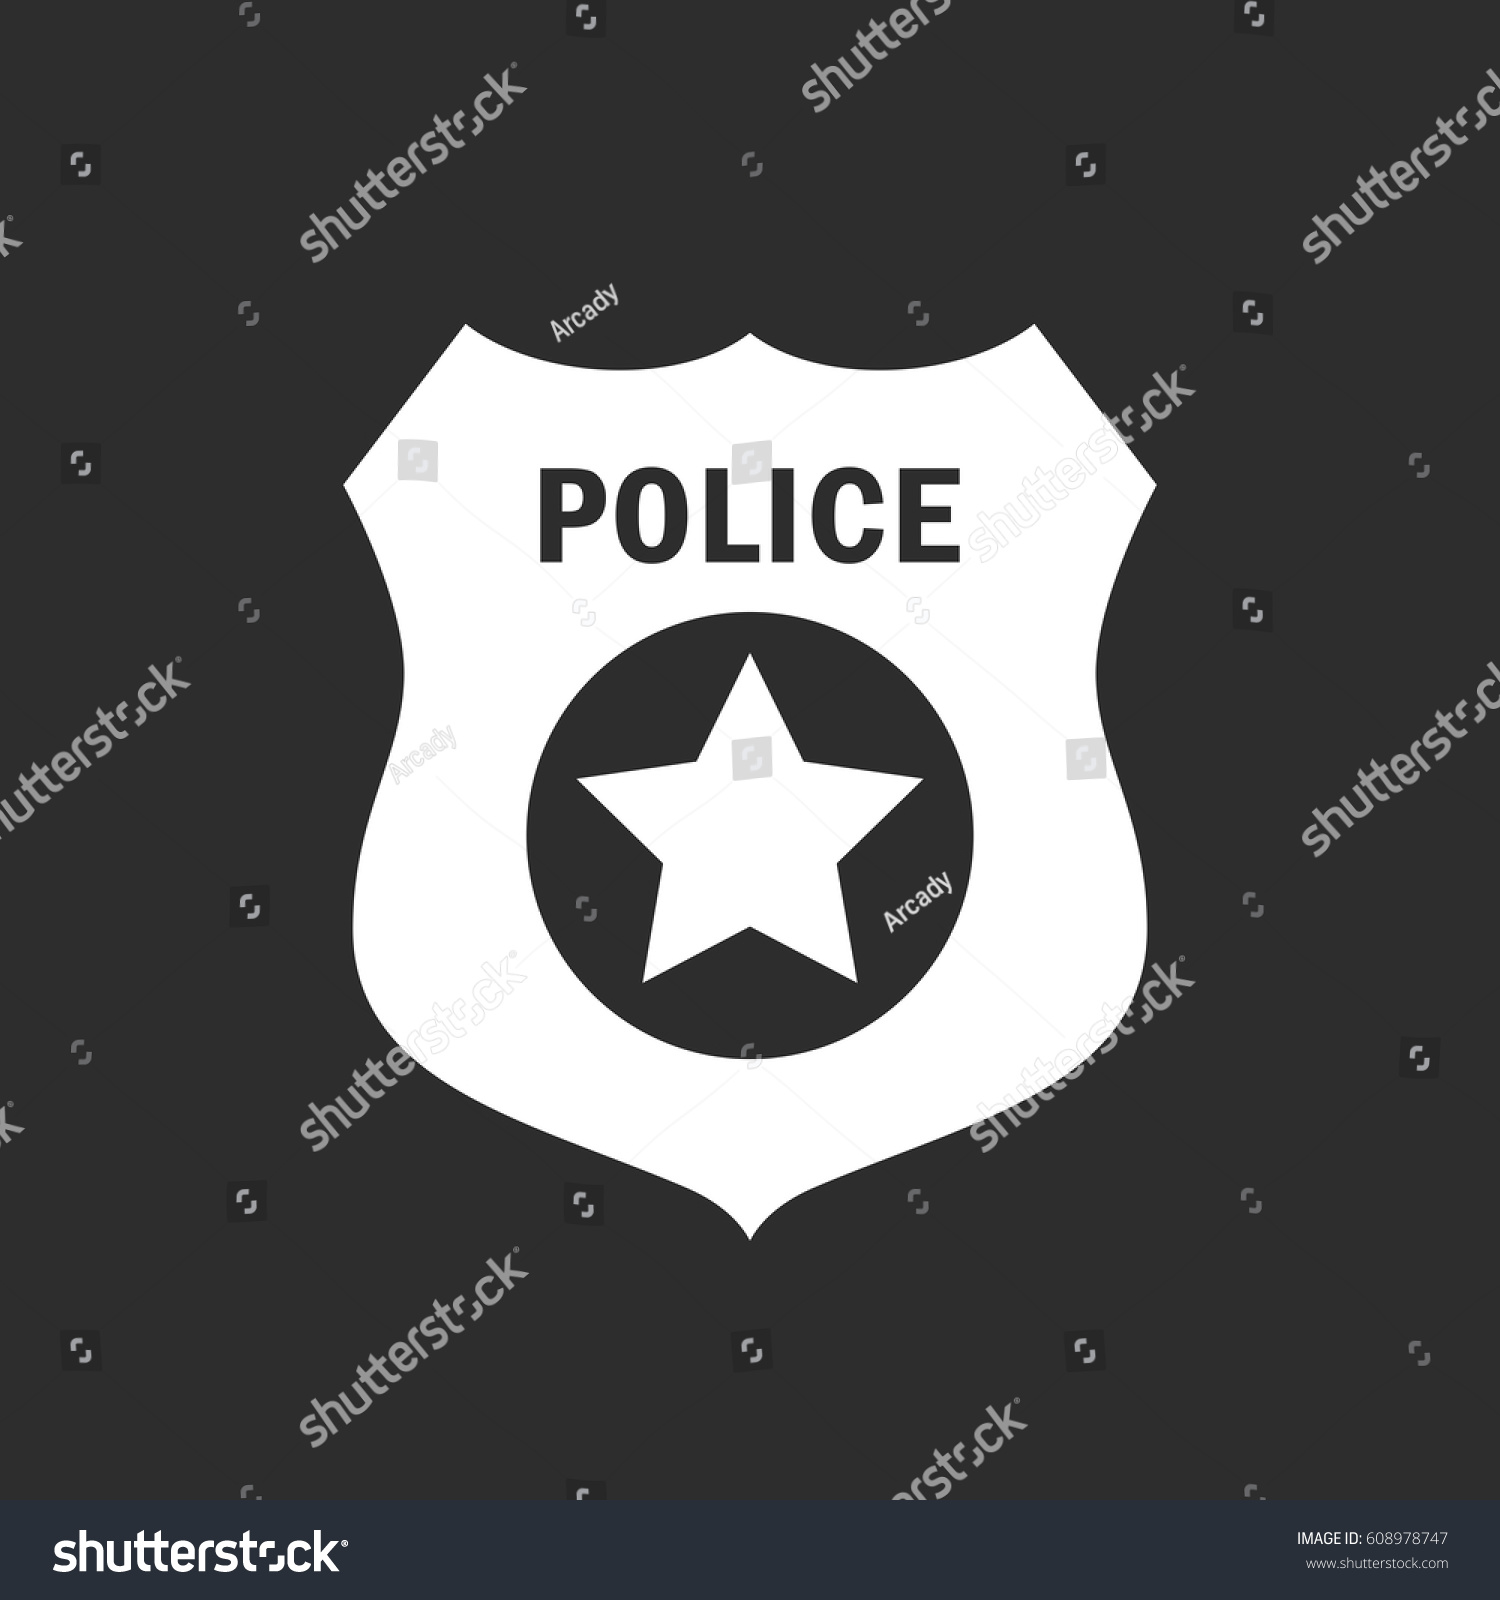 Police badge vector icon illustration isolated on black background #608978747